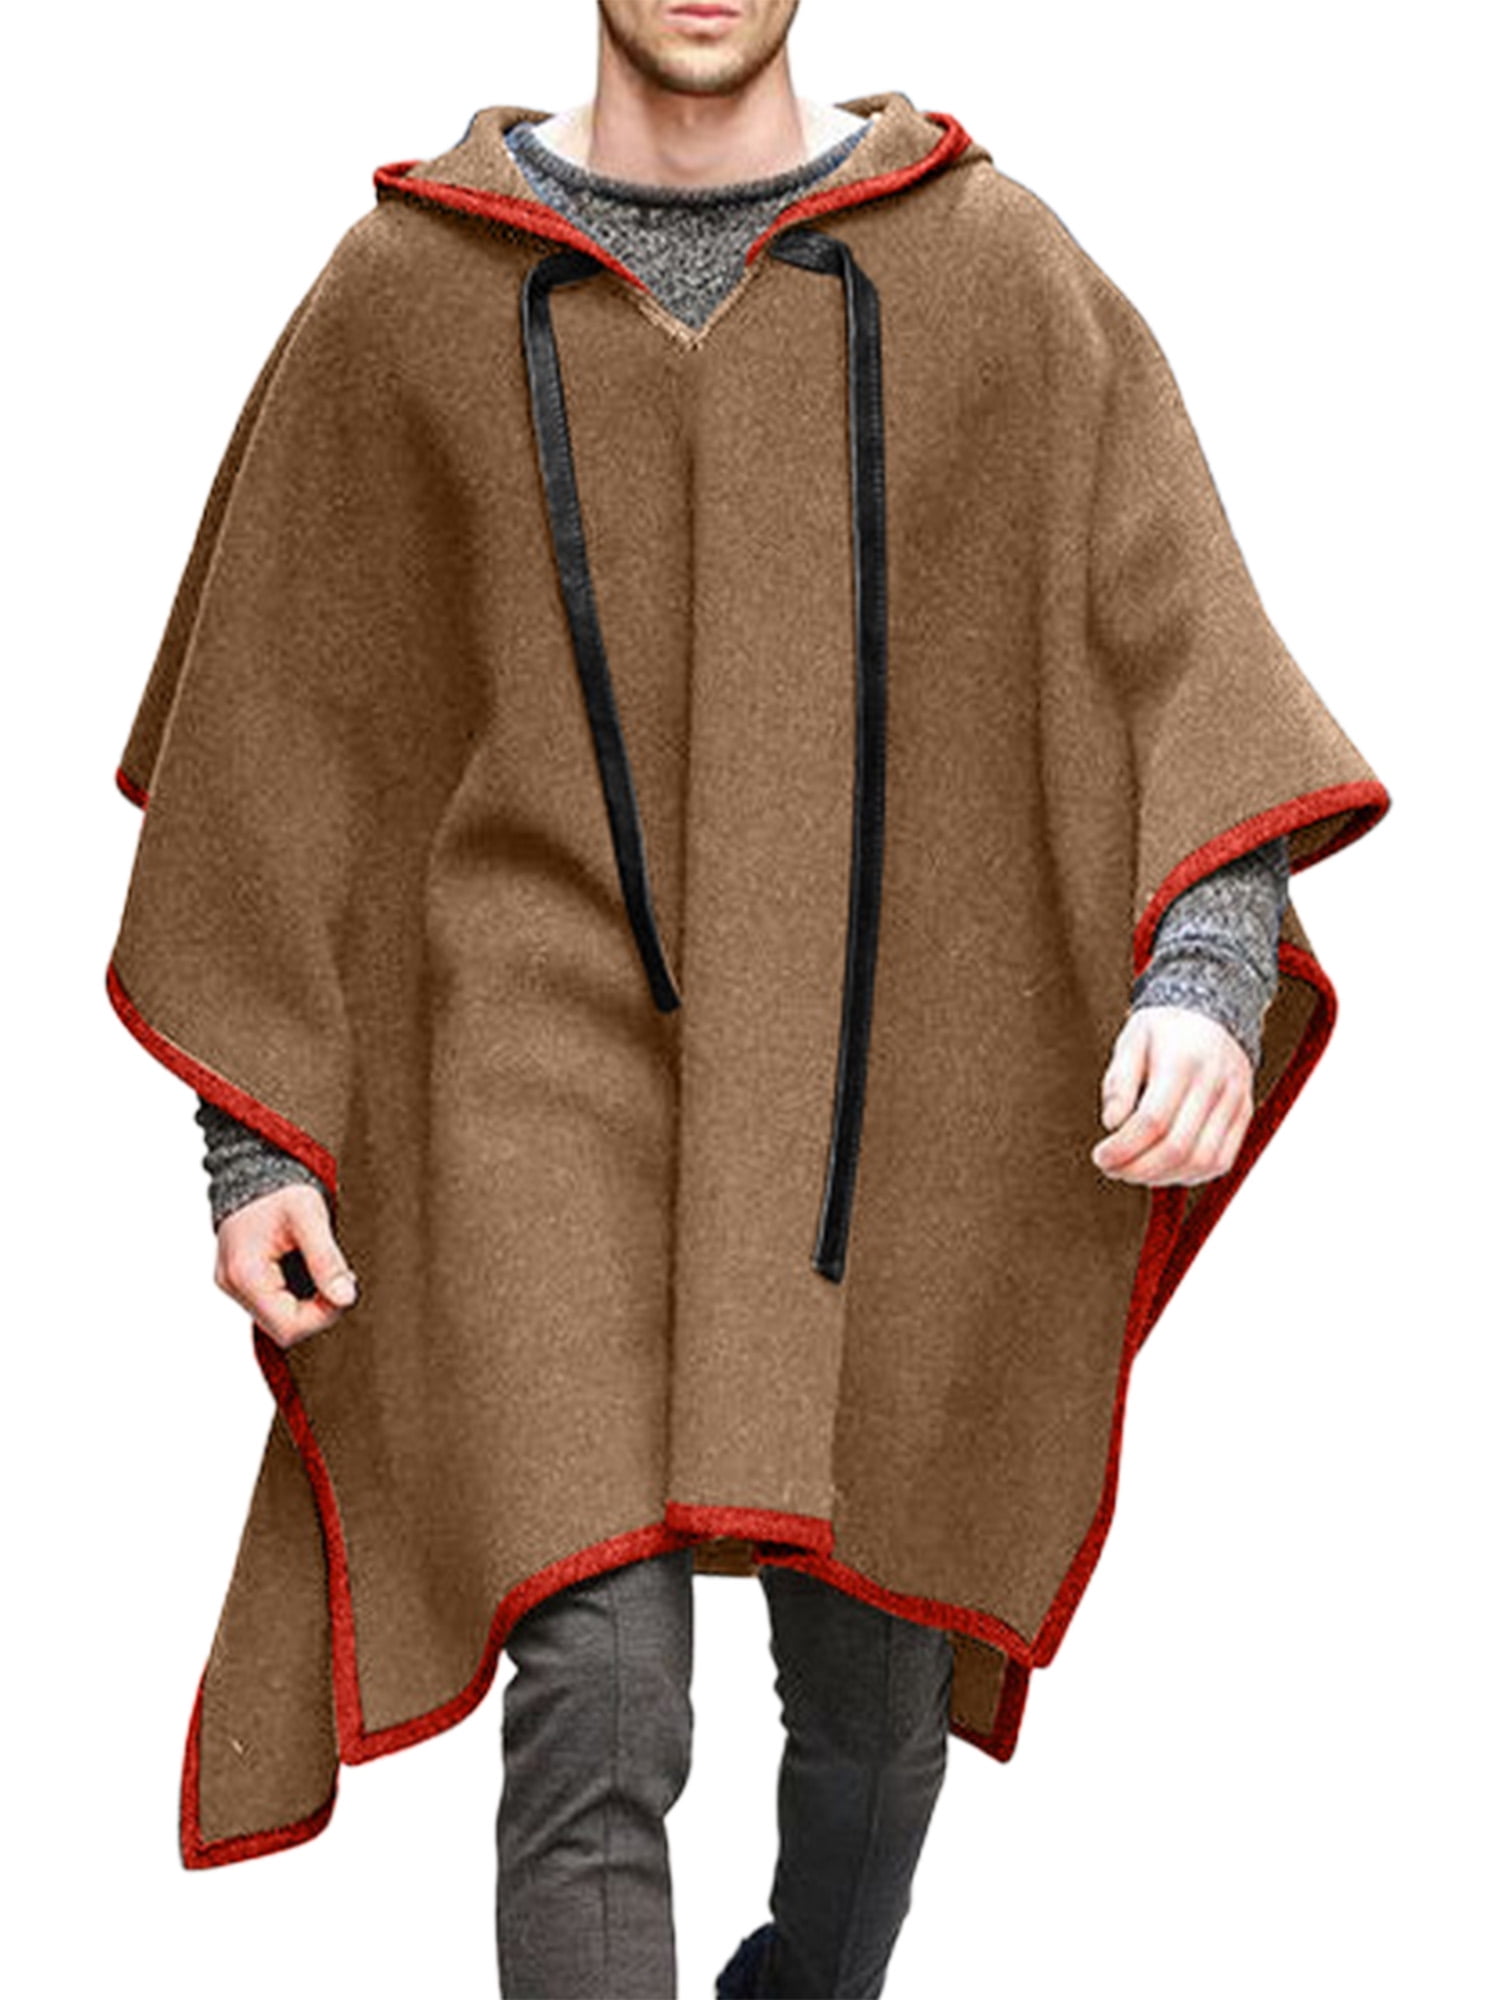 C&A Cape and poncho WOMEN FASHION Coats Cape and poncho Basic Brown S discount 85% 